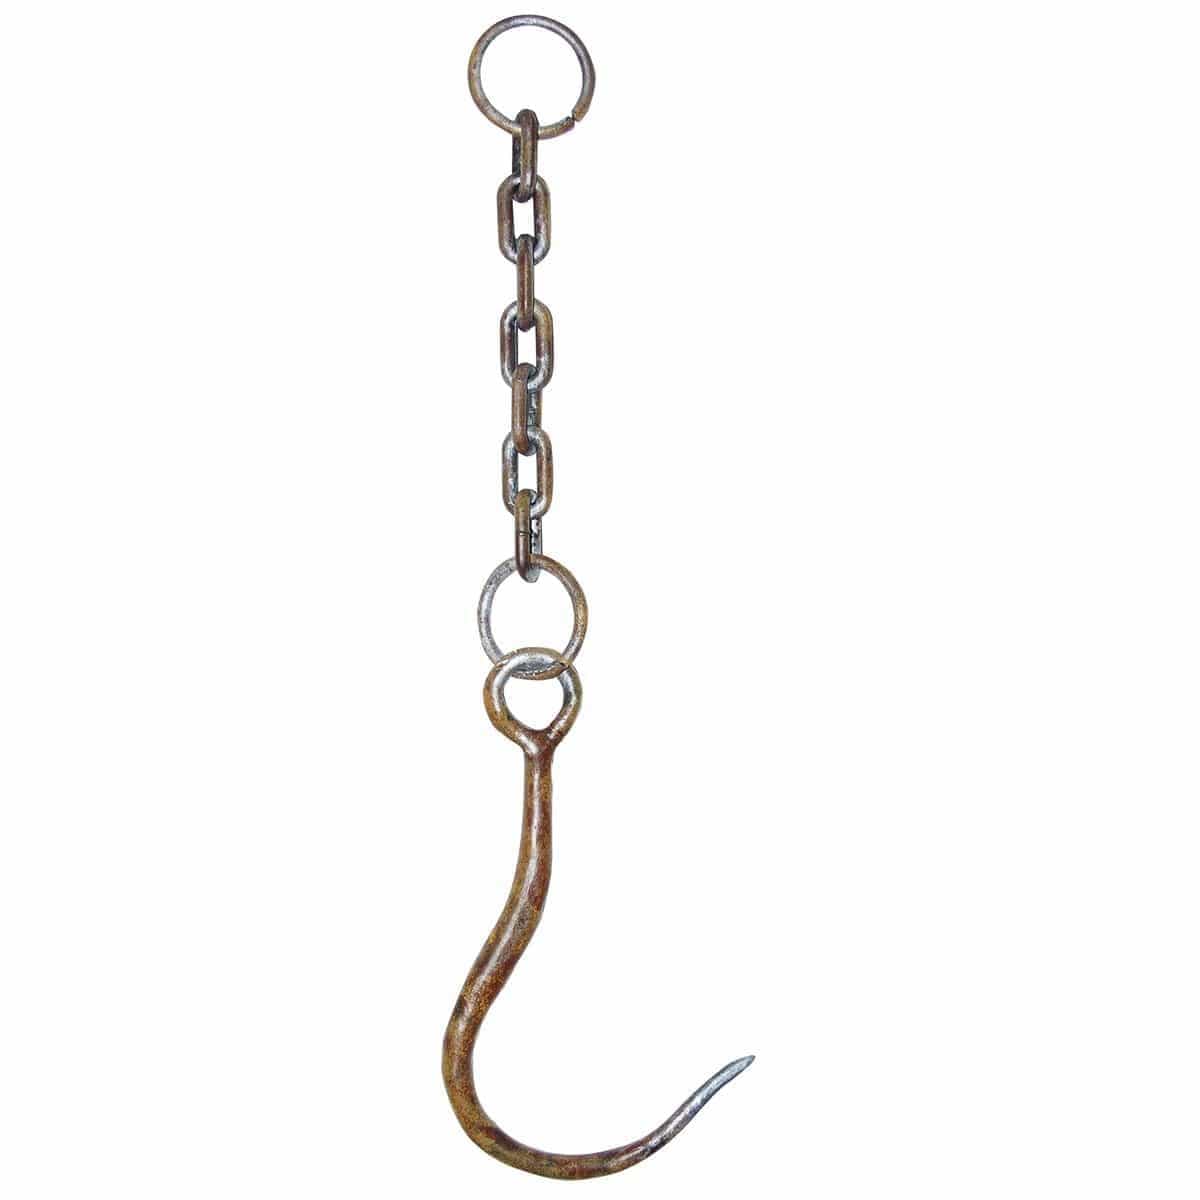 Buy Halloween Meat hook, 20 inches sold at Party Expert